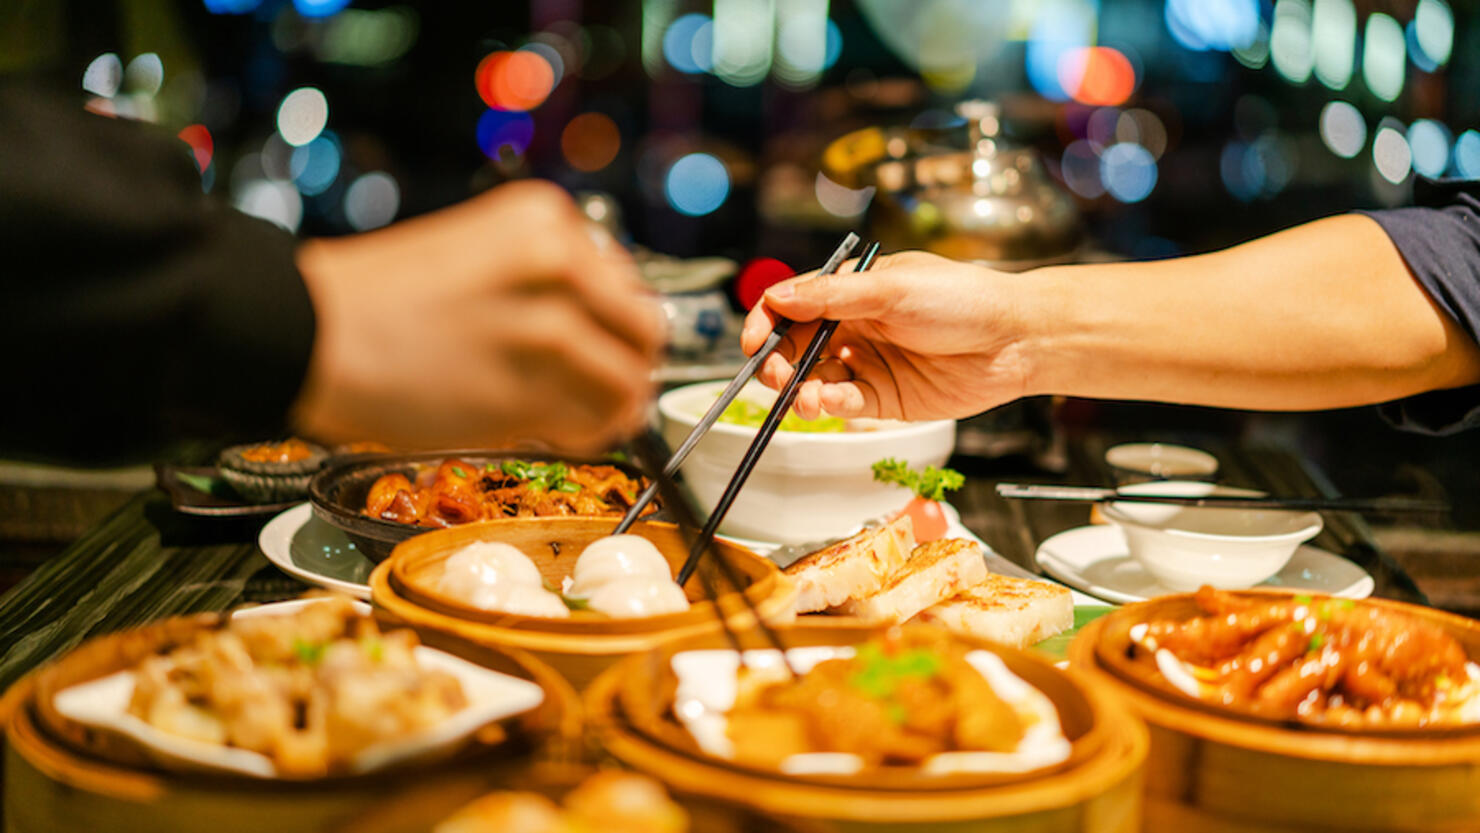 Many people are eating Guangzhou snacks and evening dining environment